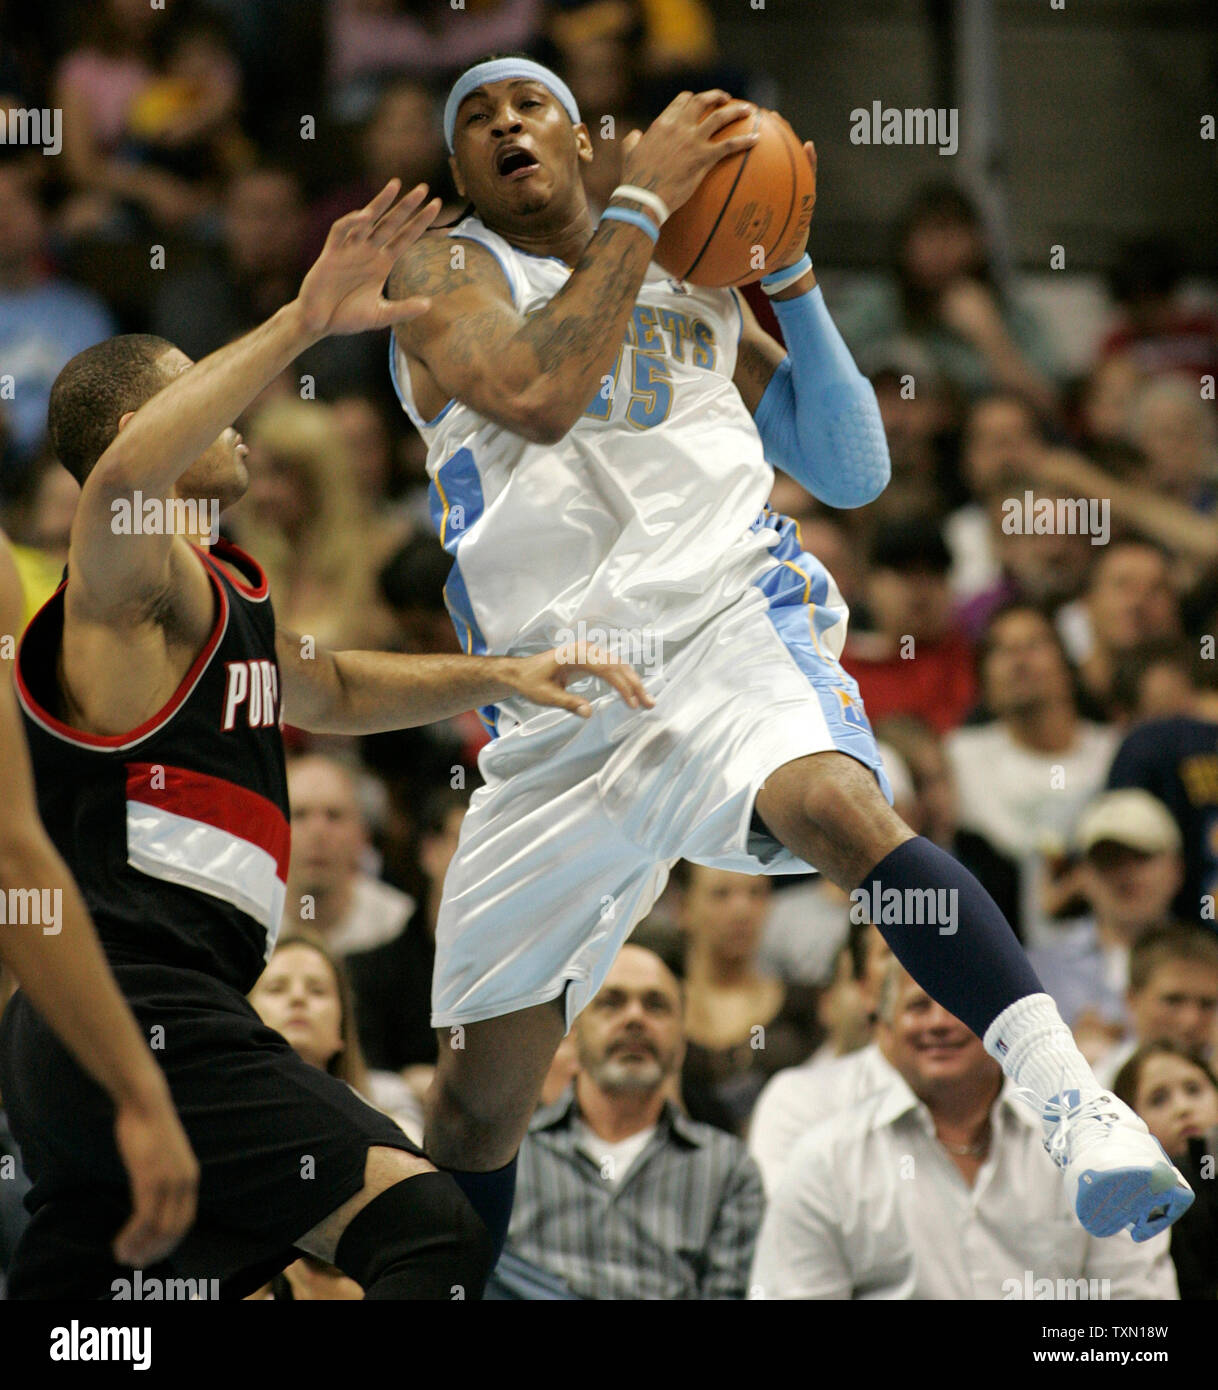 Denver Nuggets forward Carmelo Anthony (R) grabs high pass while being fouled by Portland Trail Blazers forward Ime Udoka in the second quarter at the Pepsi Center in Denver on March 13, 2007.  (UPI Photo/Gary C. Caskey) Stock Photo